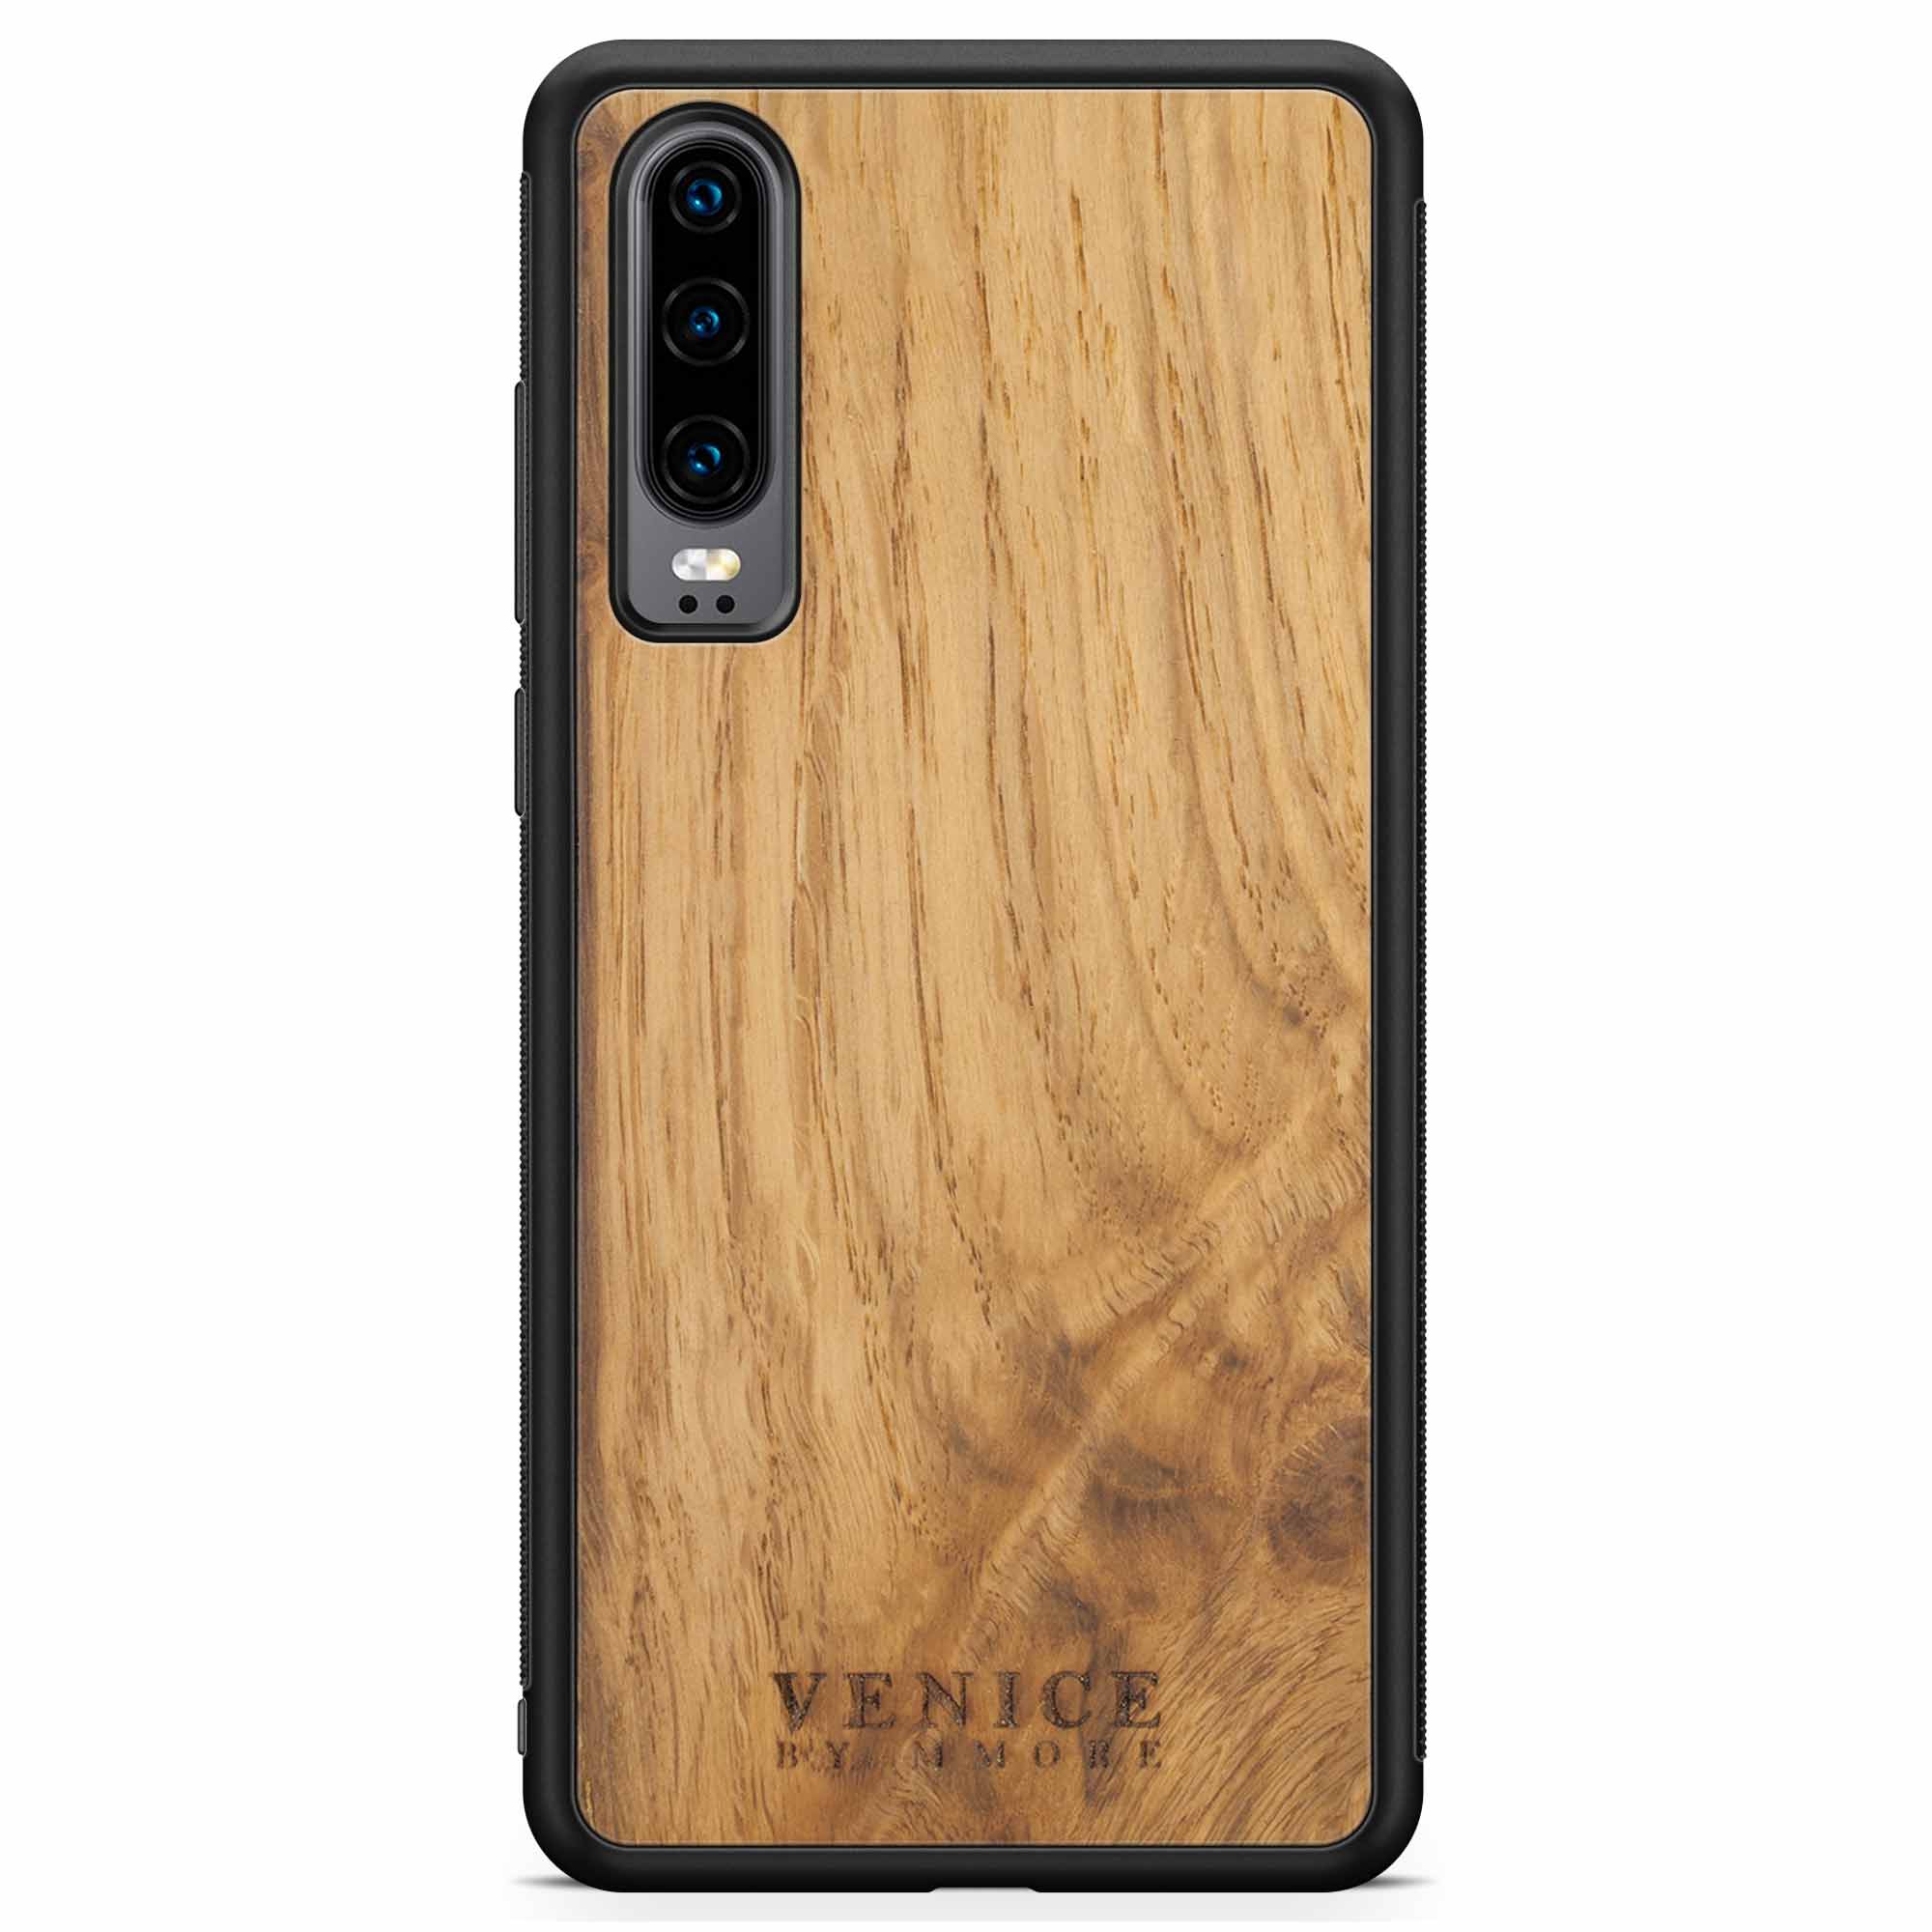 Venice Lettering Wood Phone Case Huawei P30 